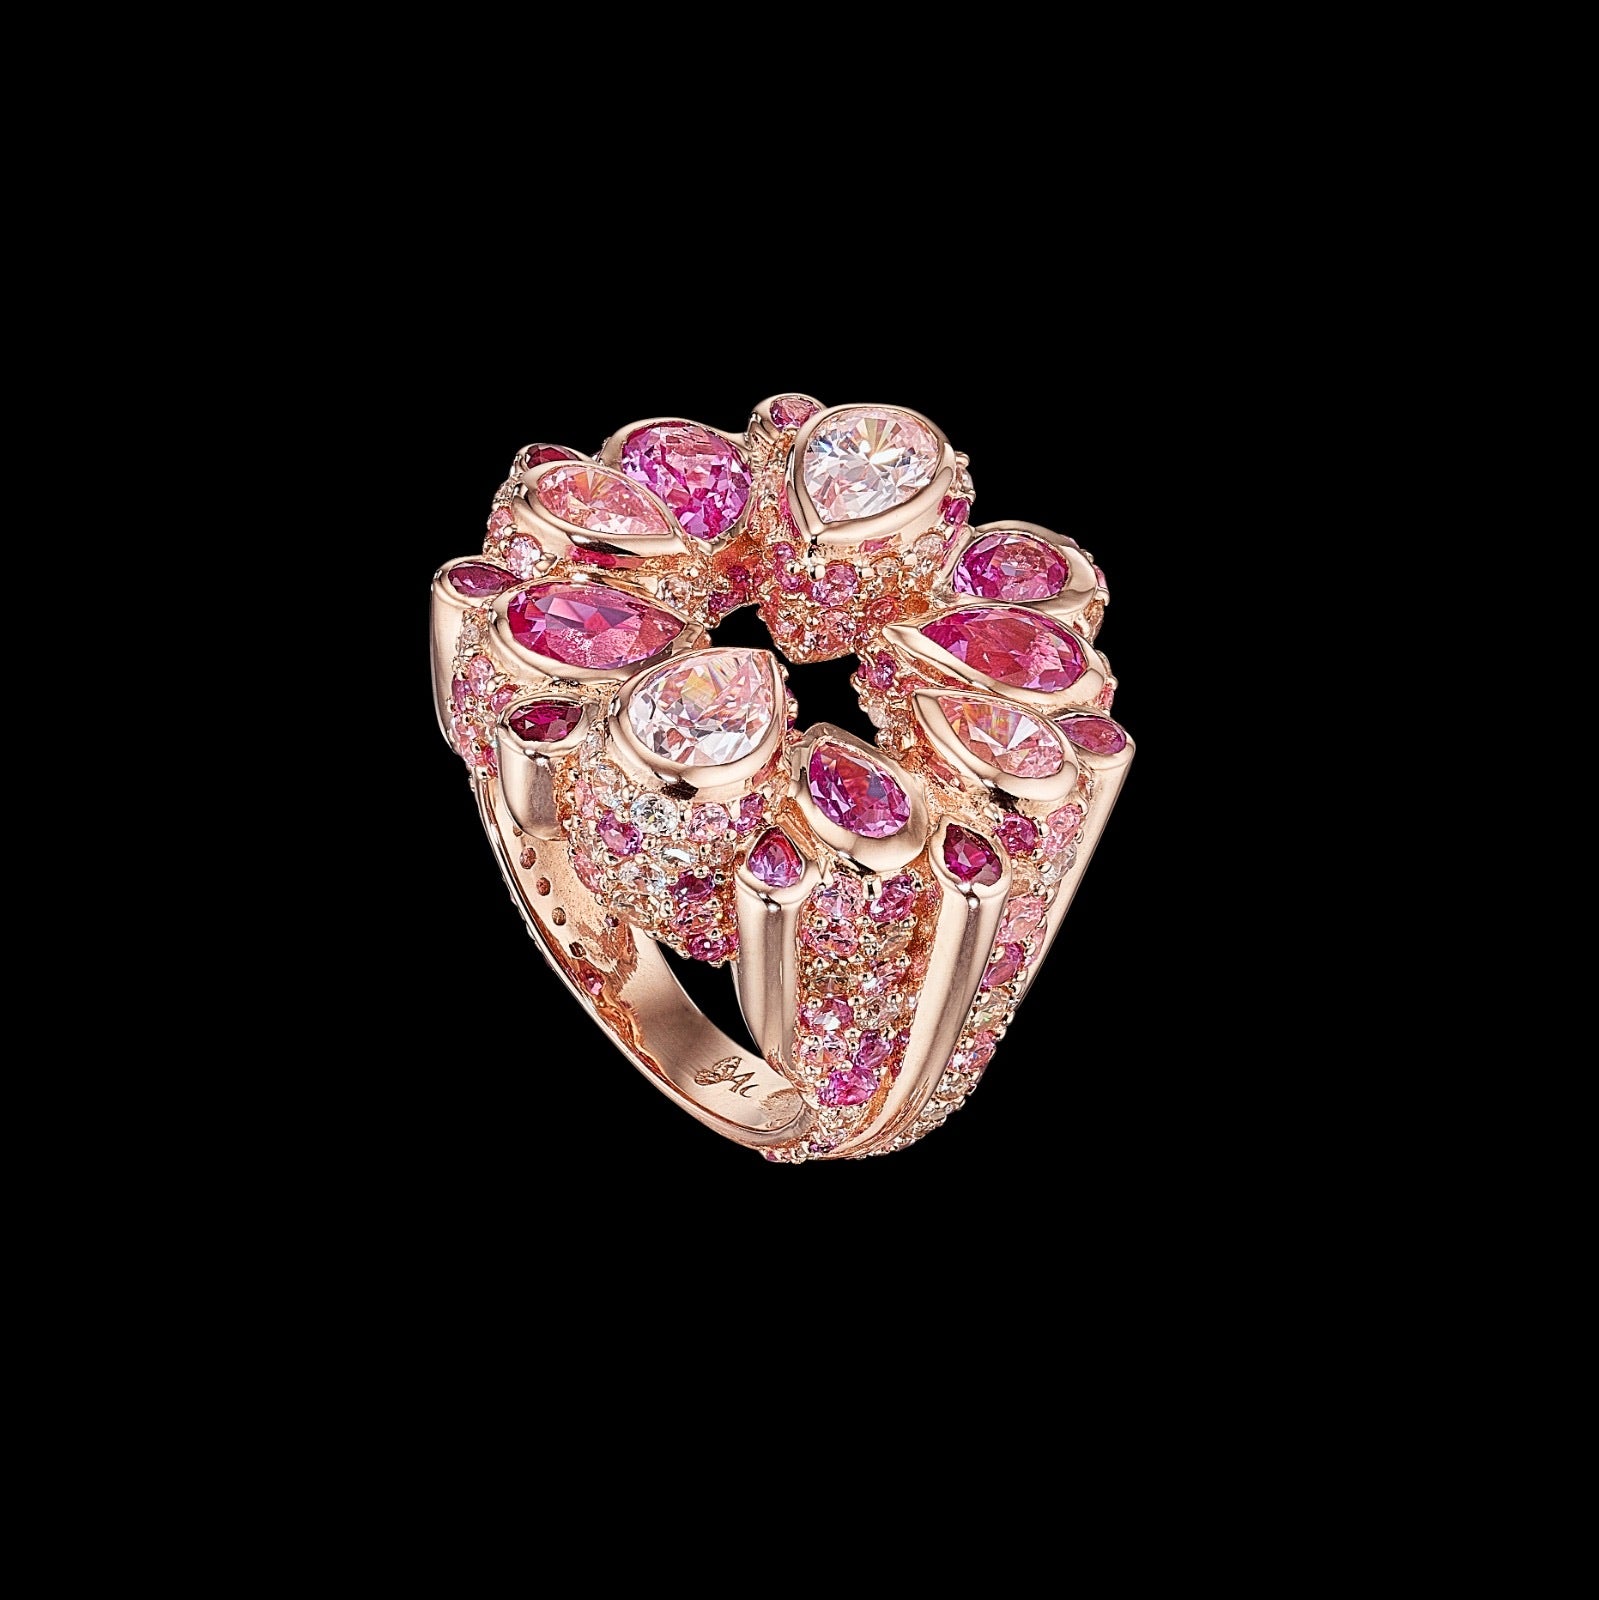 Fuchsia Pavé Panettone Ring, Ring, Anabela Chan Joaillerie - Fine jewelry with laboratory grown and created gemstones hand-crafted in the United Kingdom. Anabela Chan Joaillerie is the first fine jewellery brand in the world to champion laboratory-grown and created gemstones with high jewellery design, artisanal craftsmanship and a focus on ethical and sustainable innovations.